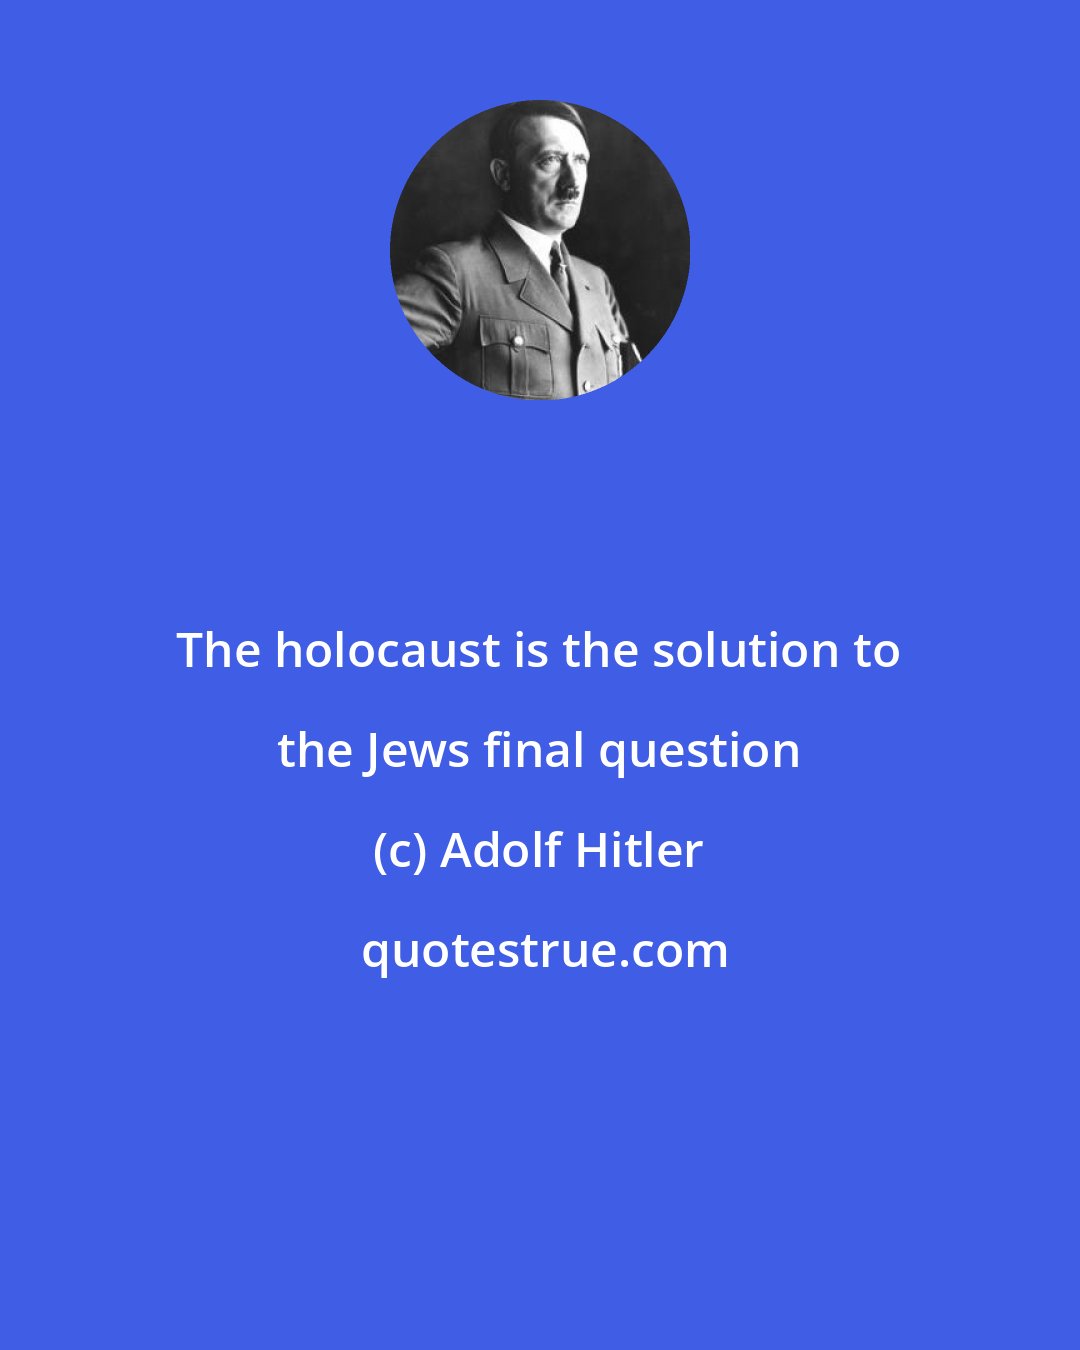 Adolf Hitler: The holocaust is the solution to the Jews final question